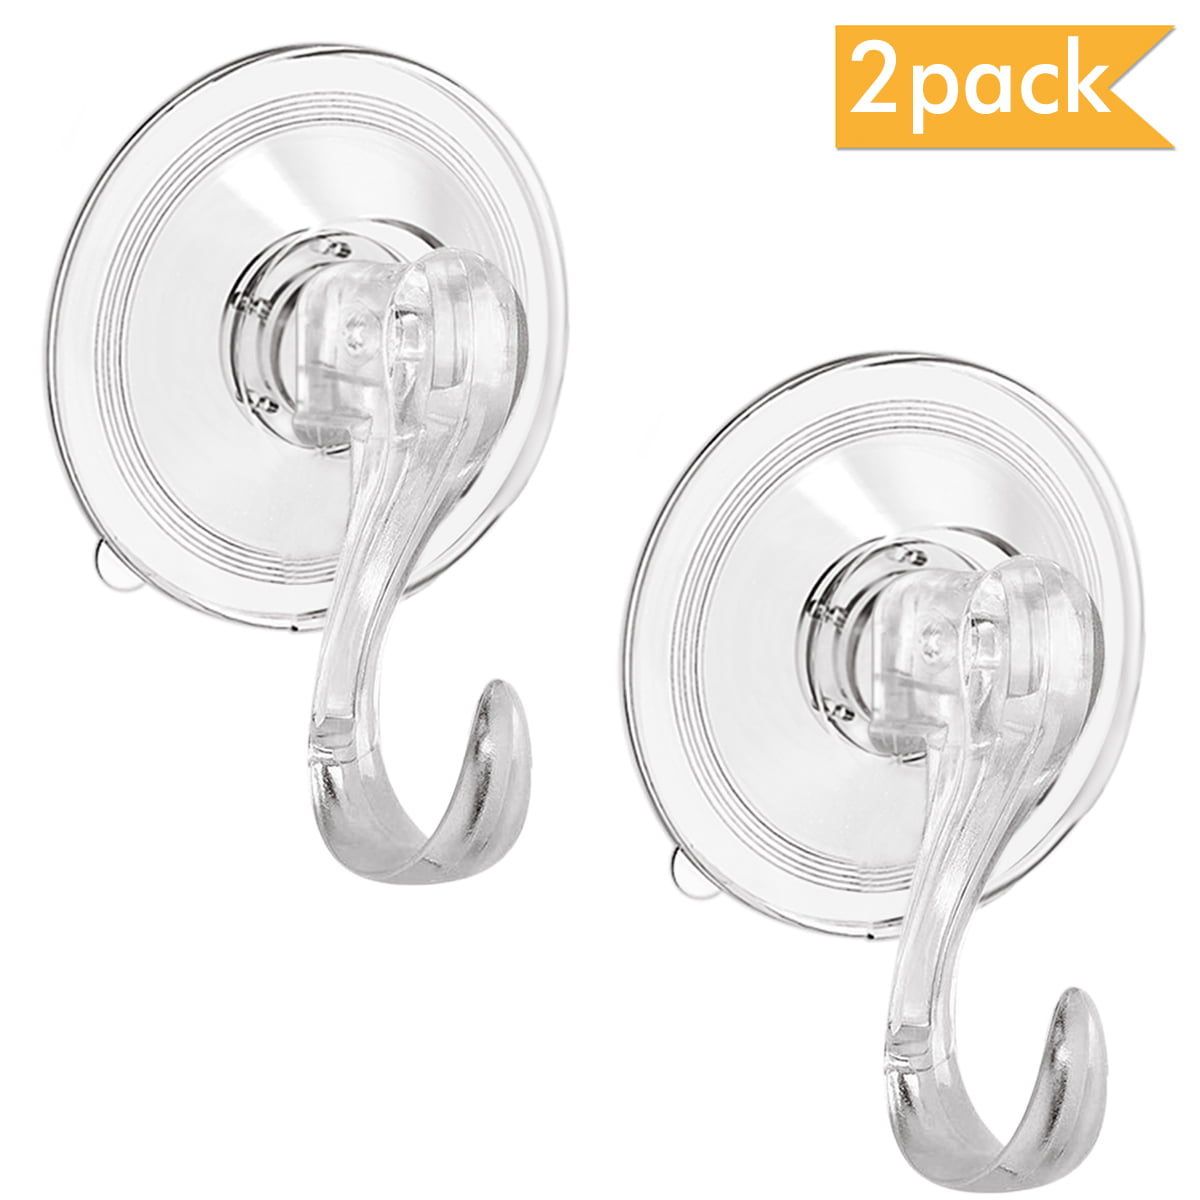 CLEAR SUCTION CUP HOOKS HOLDER WINDOW GLASS MIRROR CHRISTMAS XMAS DECORATION 